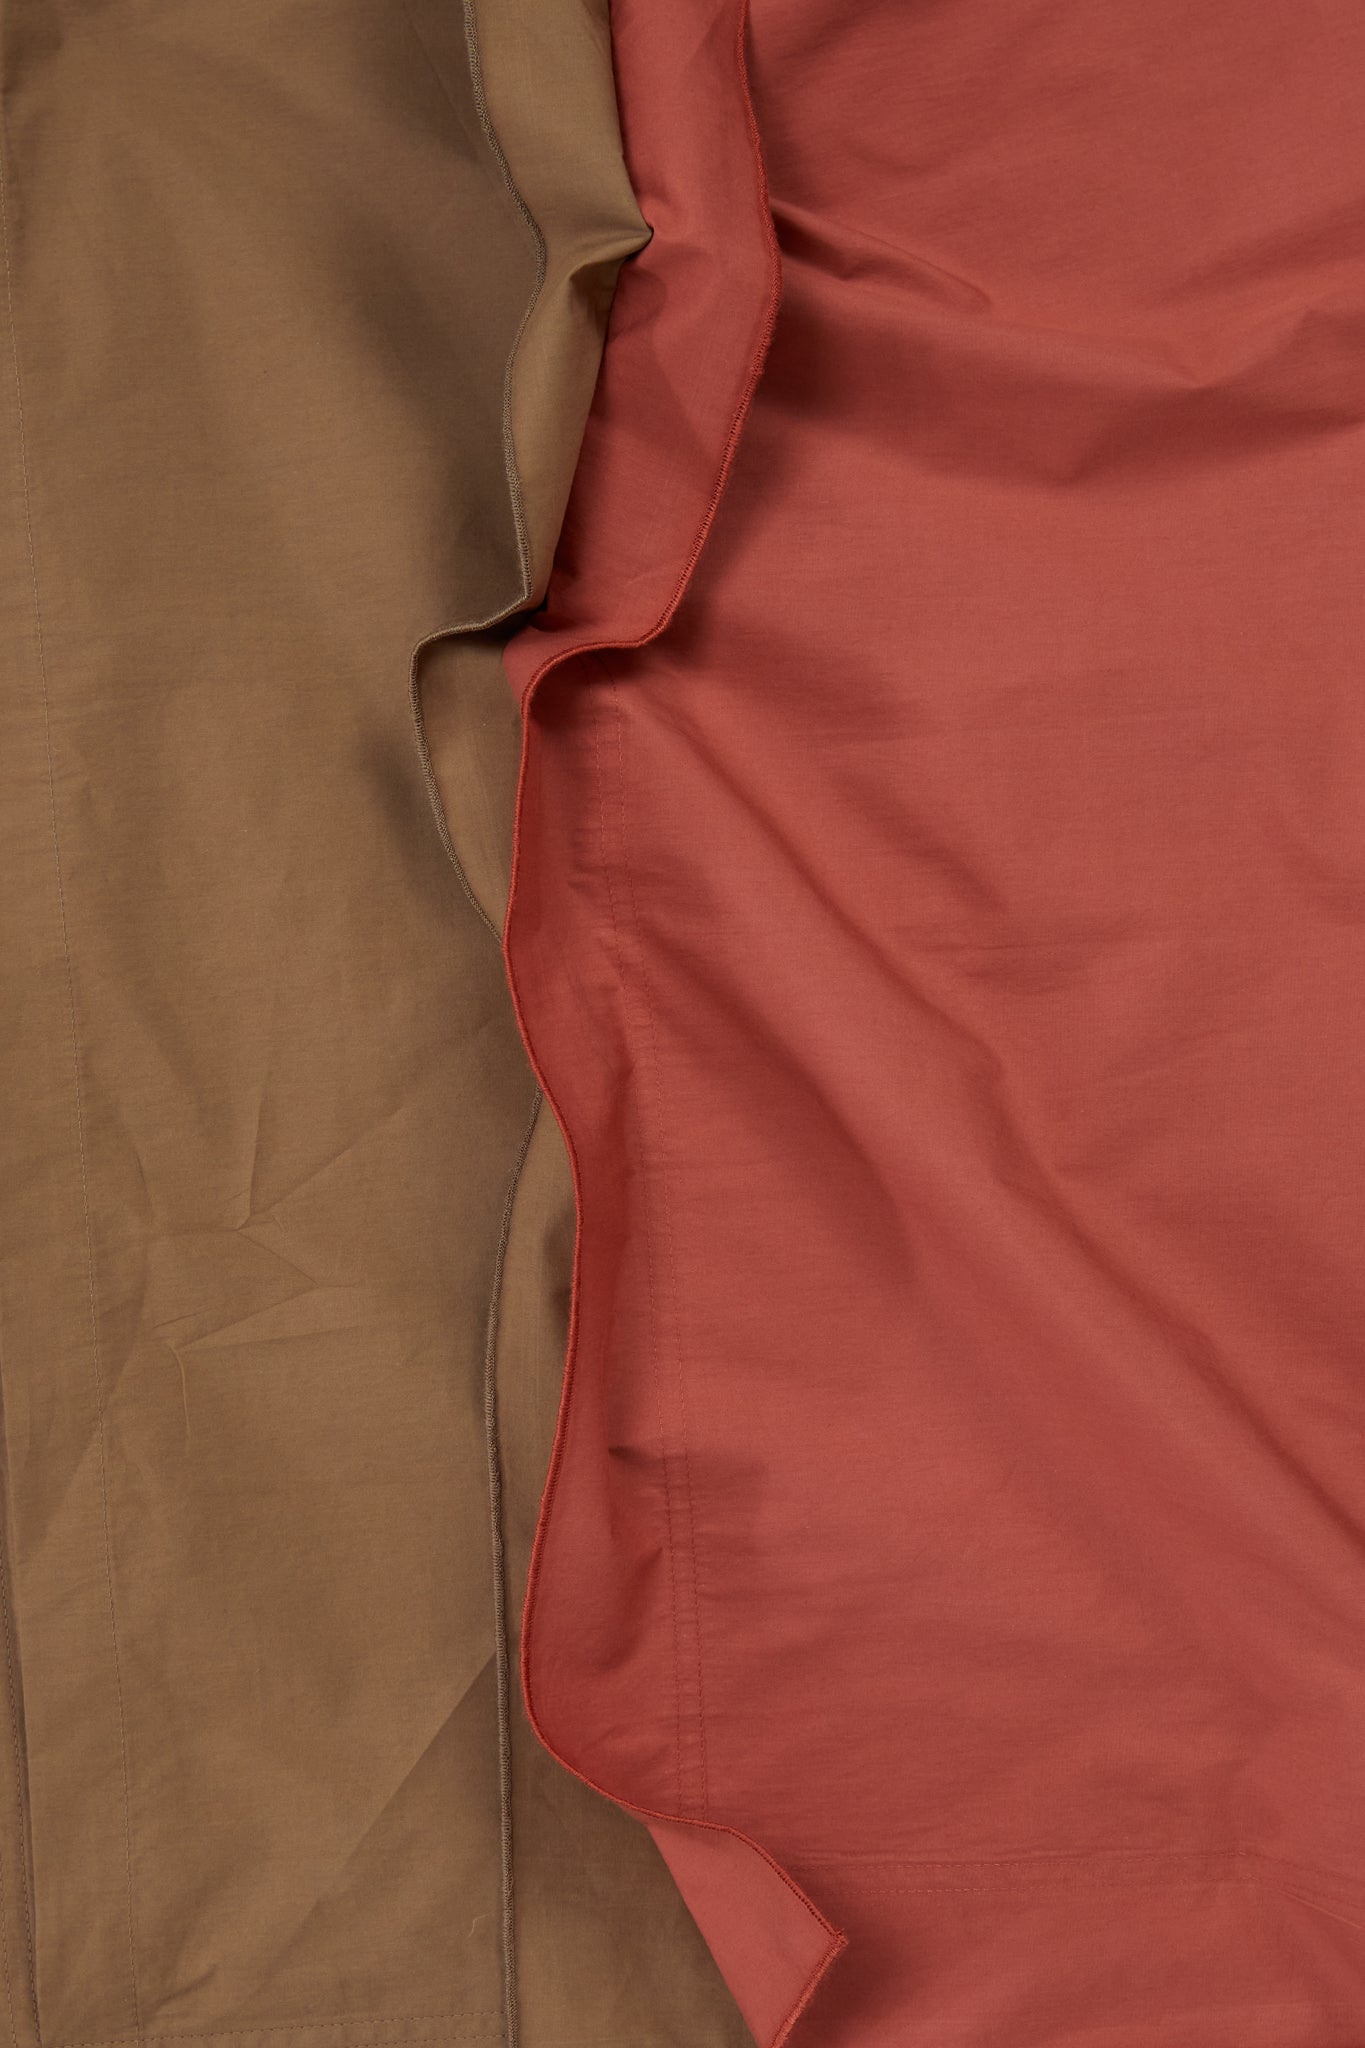 Duvet Cover in BI COLOUR Carob and Ochre Red